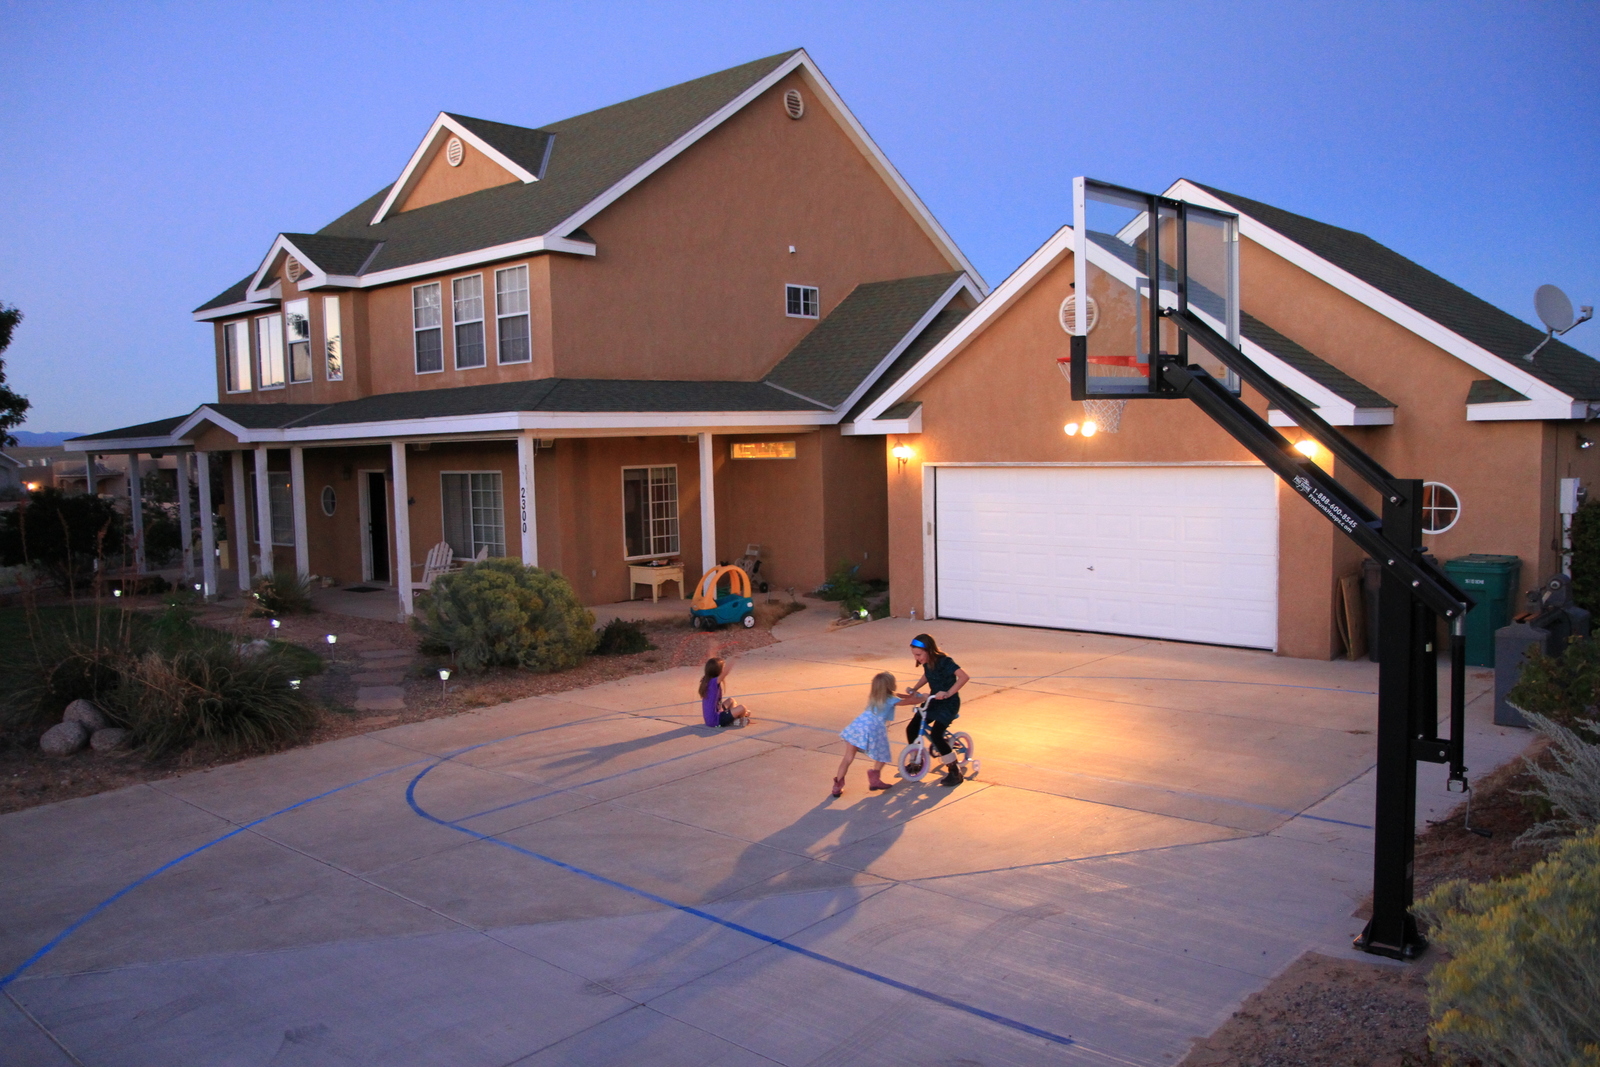 Standing tall in front of a picturesque home, this Pro Dunk Platinum Basketball system is a great addition to the property.